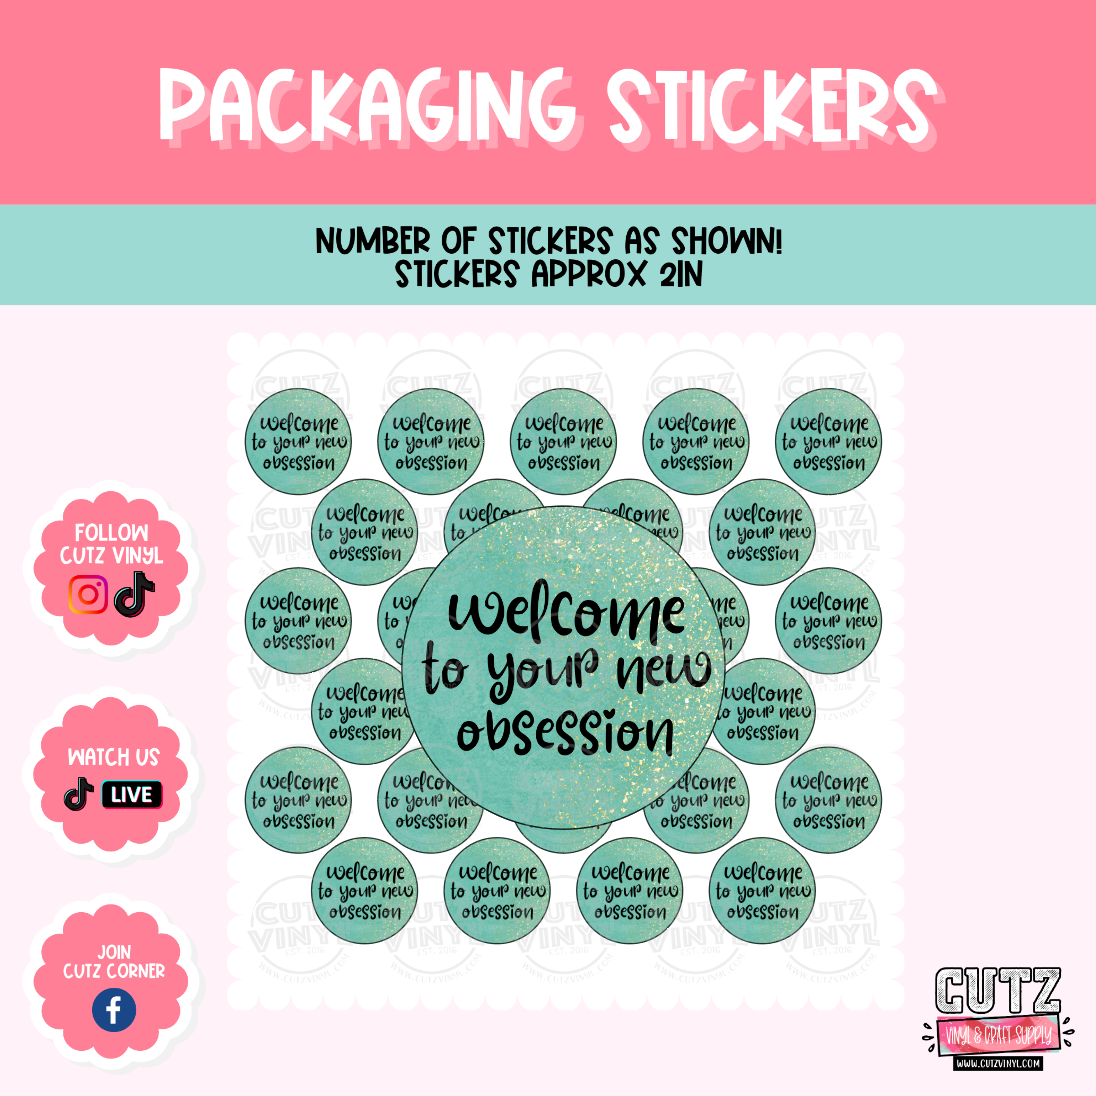 Your New Obsession  - Packaging Stickers